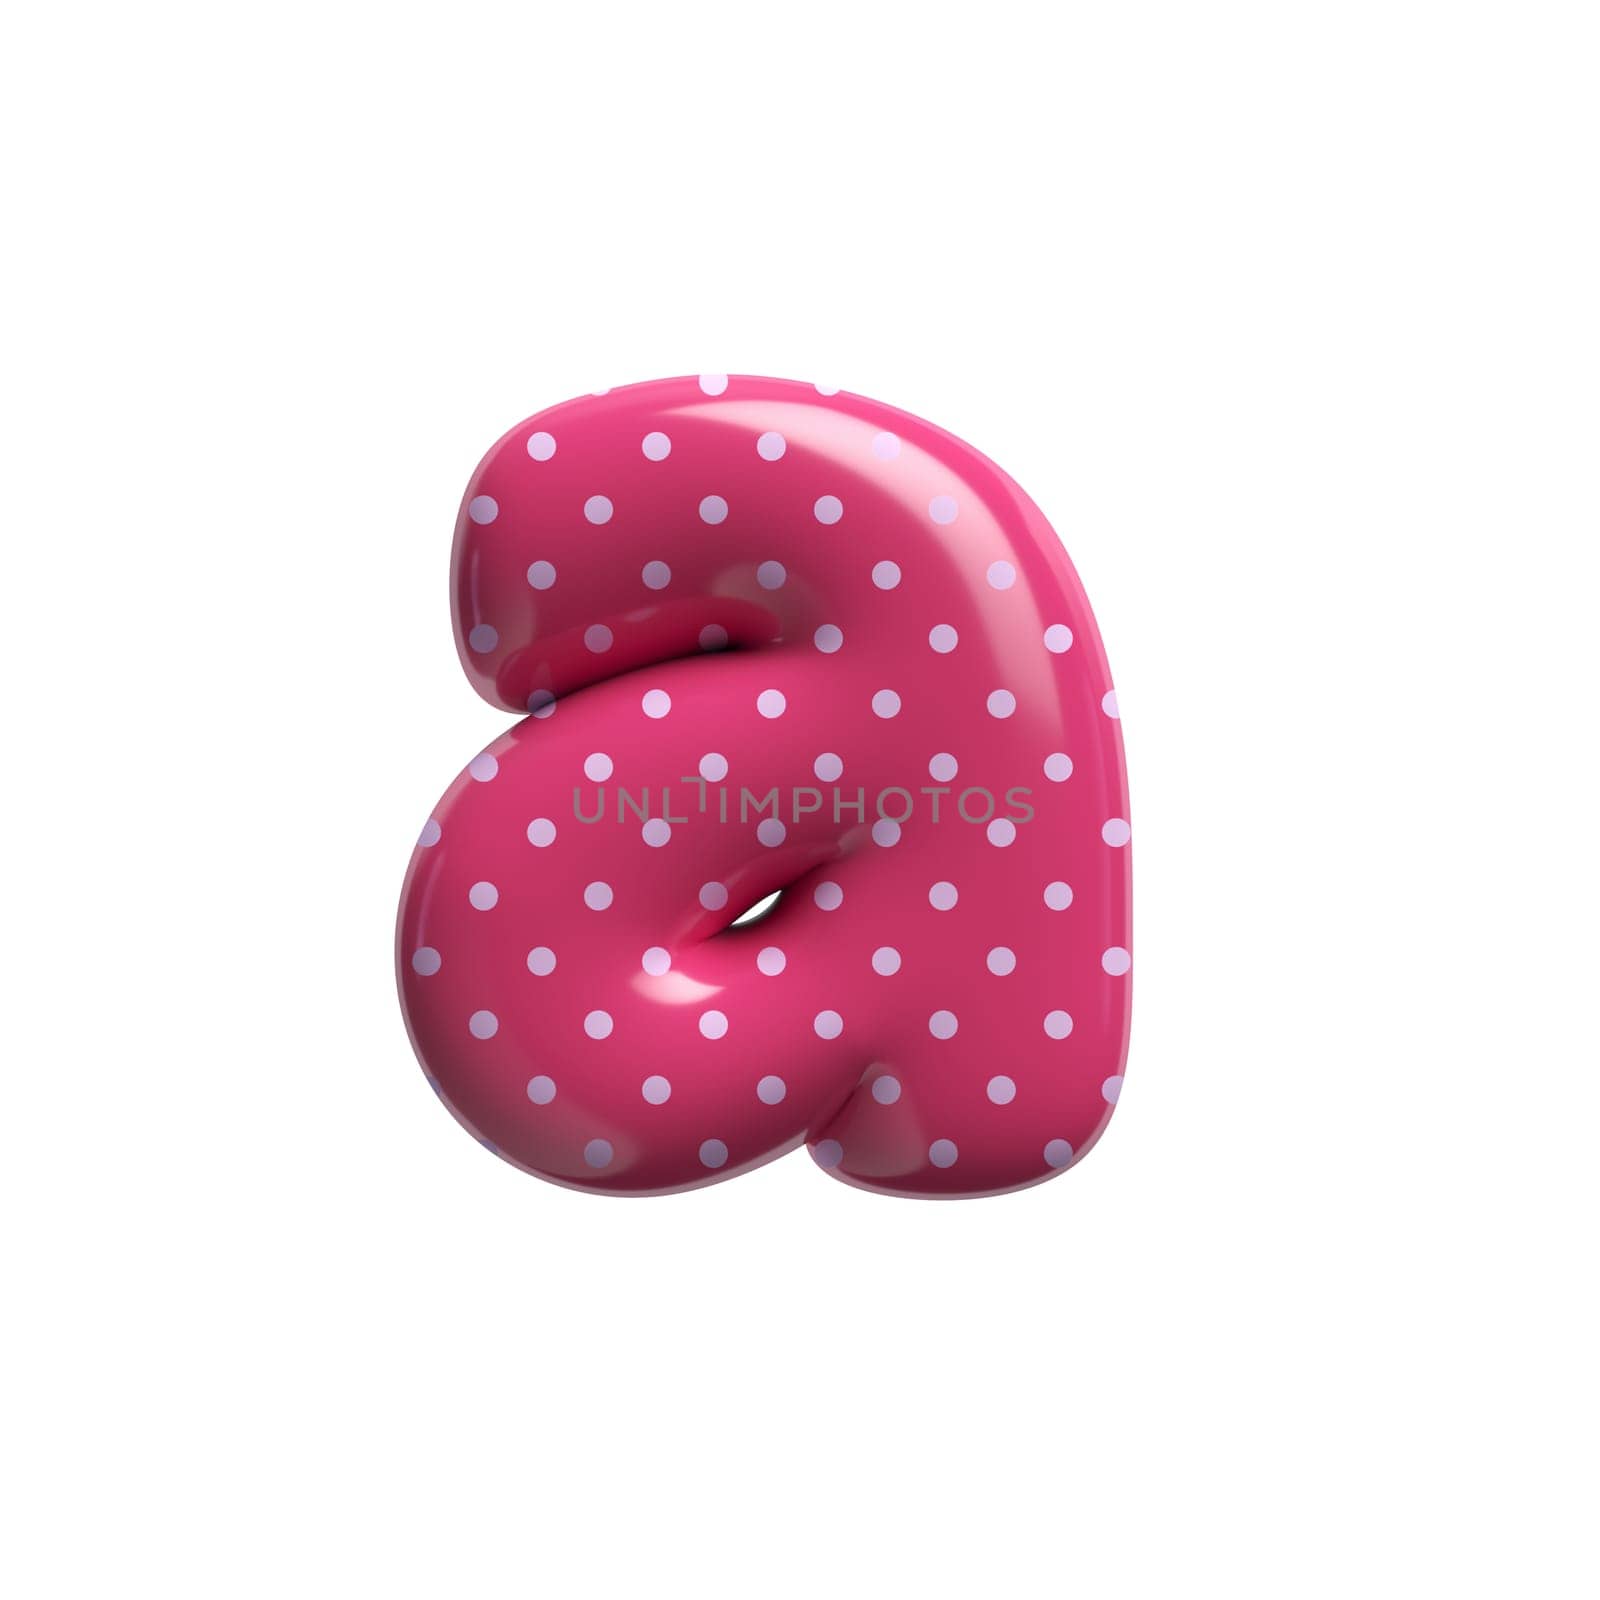 Polka dot letter A - Lowercase 3d pink retro font - Suitable for Fashion, retro design or decoration related subjects by chrisroll